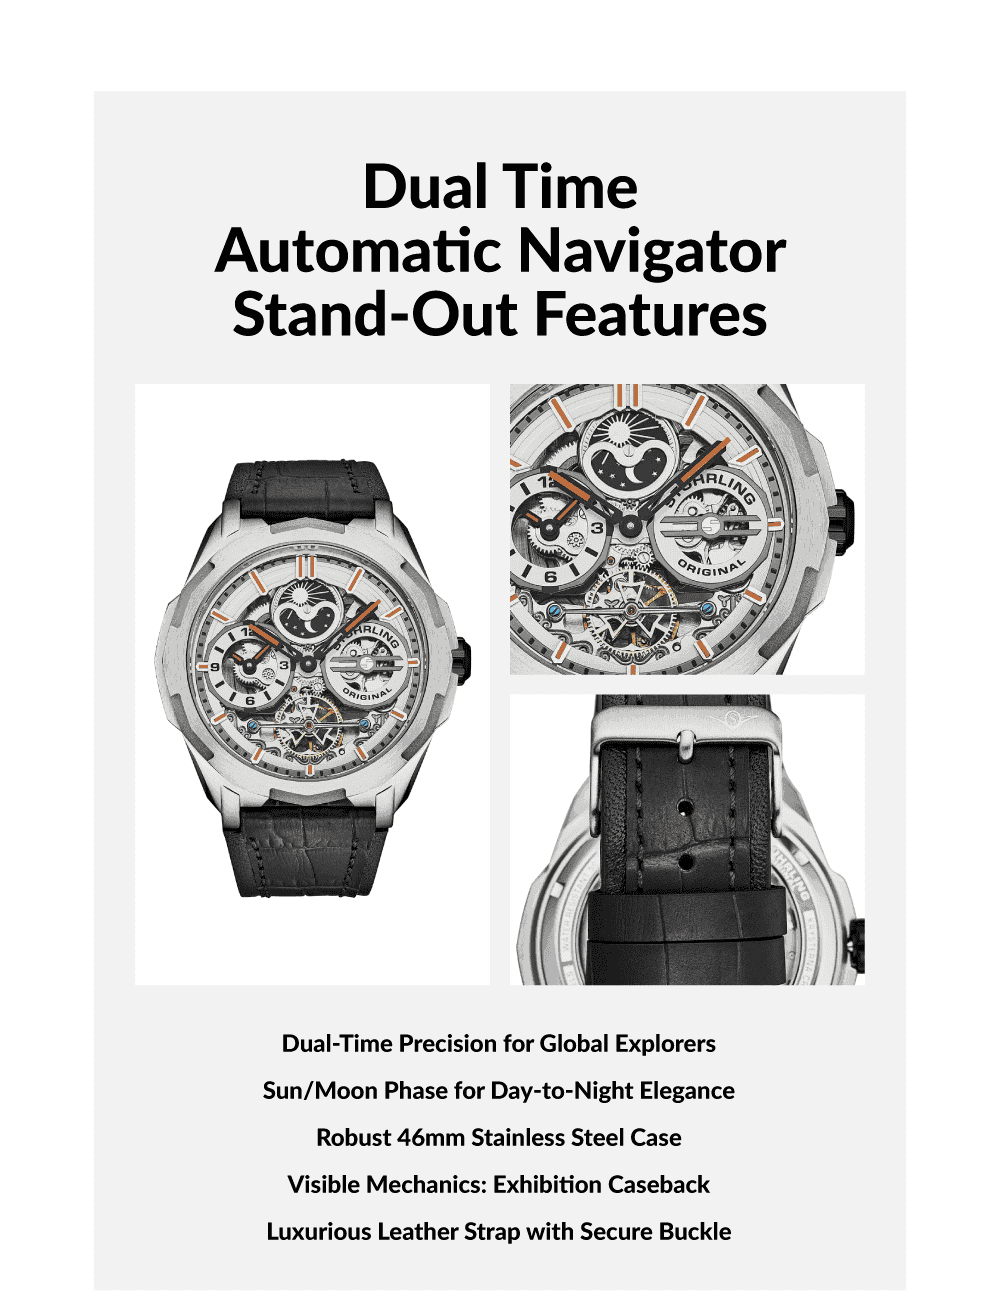 Dual Time Automatic Navigator Stand-Out Features: